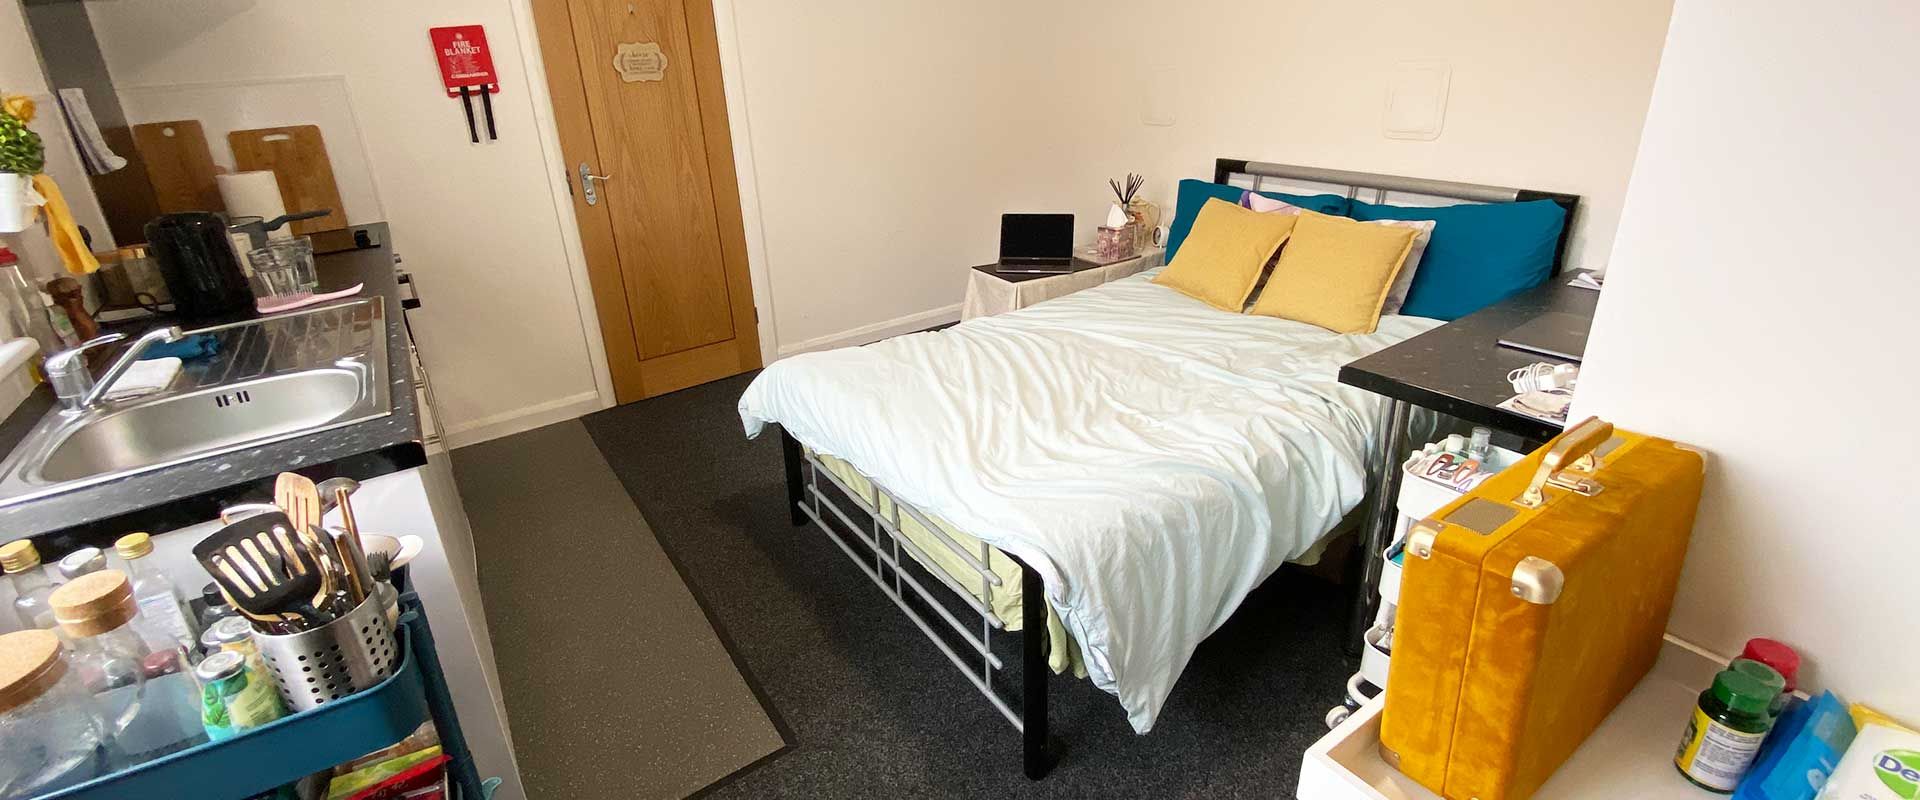 Forest Rise Loughborough Accommodation - Studios that come with all essential appliances